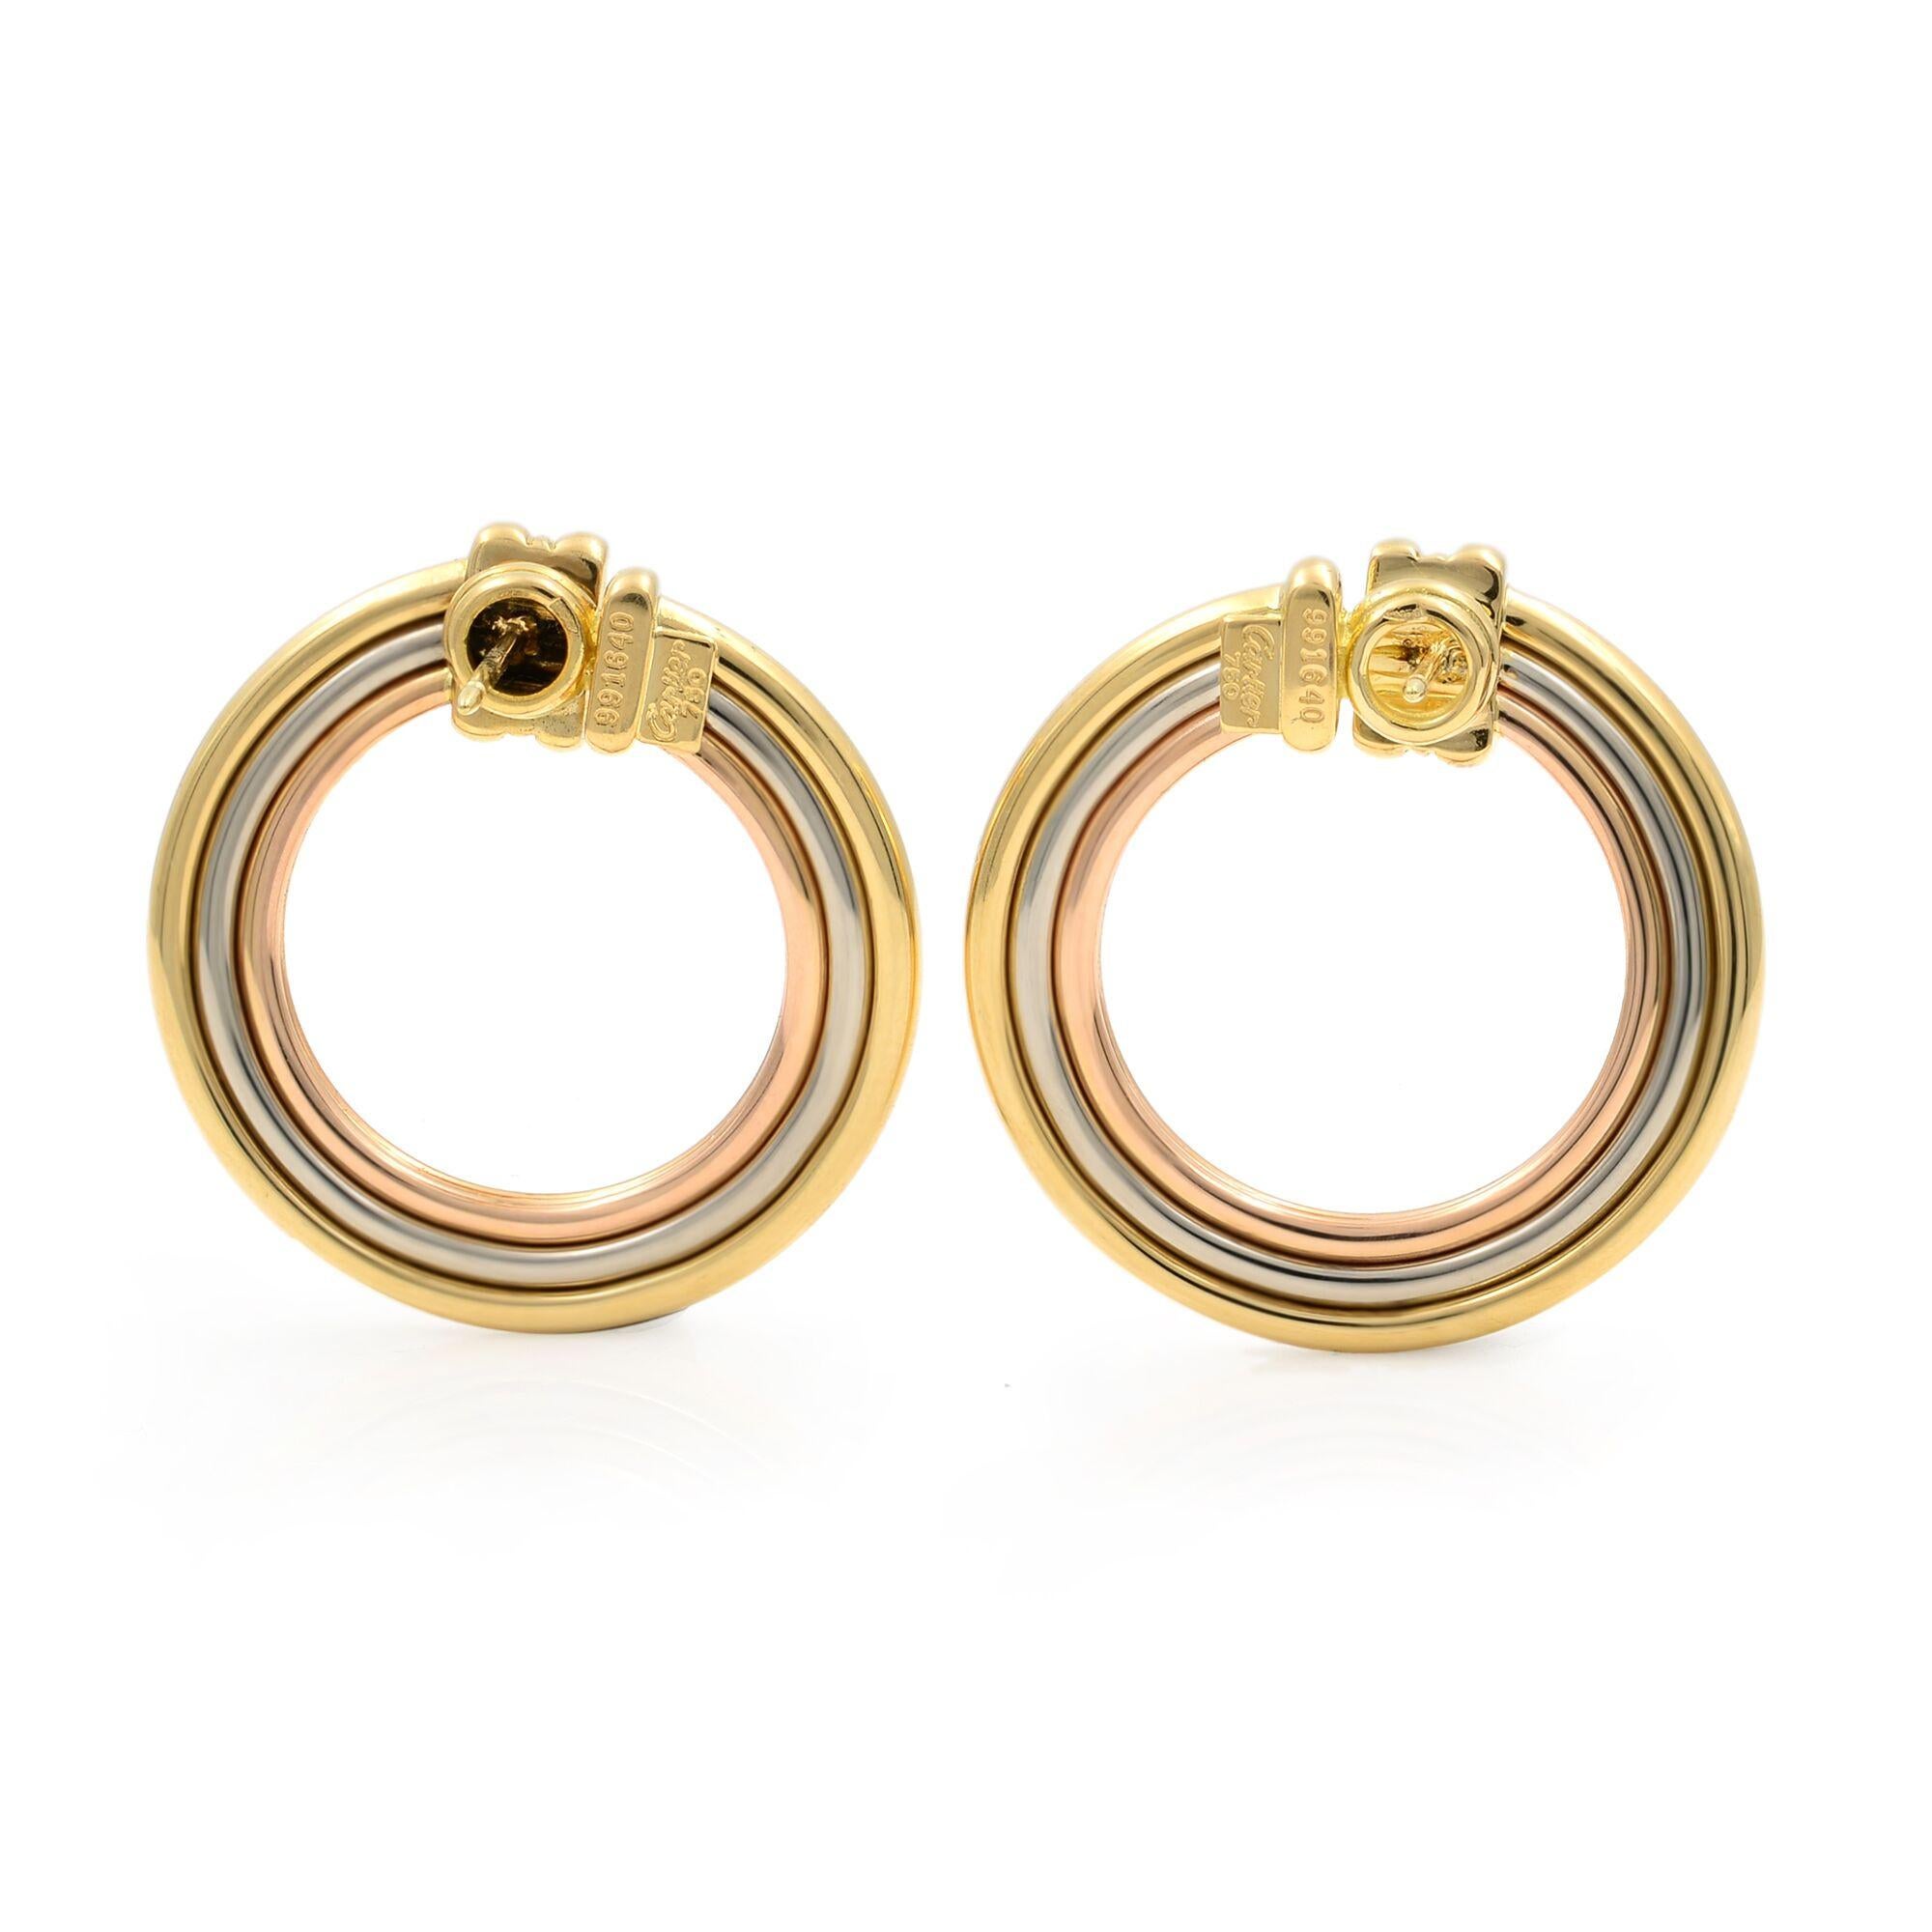 1970's Cartier Vintage Large Circle Earrings in 18 Karat white, yellow and pink gold. The large circles measure 30 x 30mm, and are signed Cartier 750, serial numbered and hallmarked. very trendy and fashionable. The earrings are in an excellent